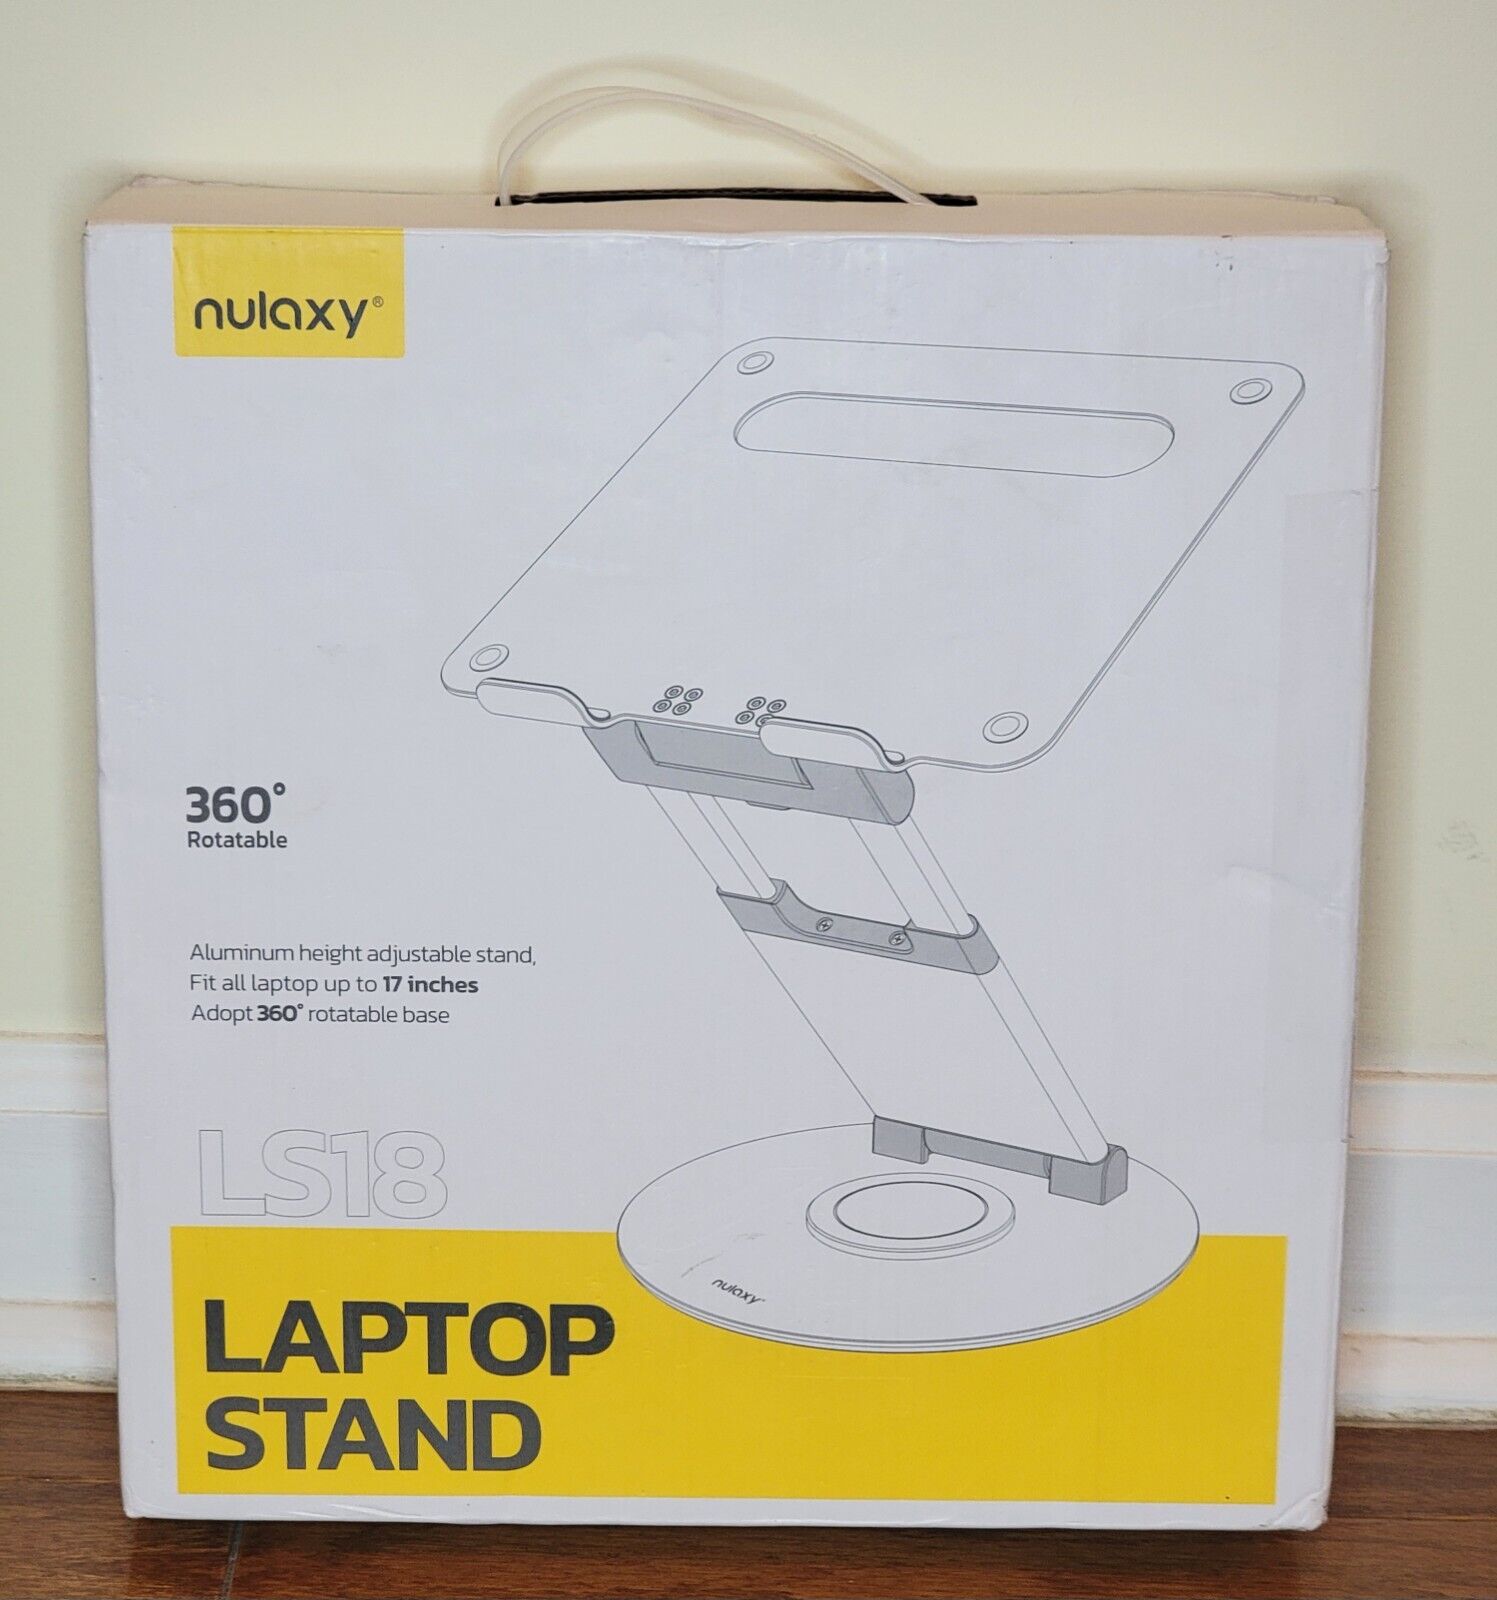 Nulaxy Laptop Stand LS18 Telescopic 360 Rotatable